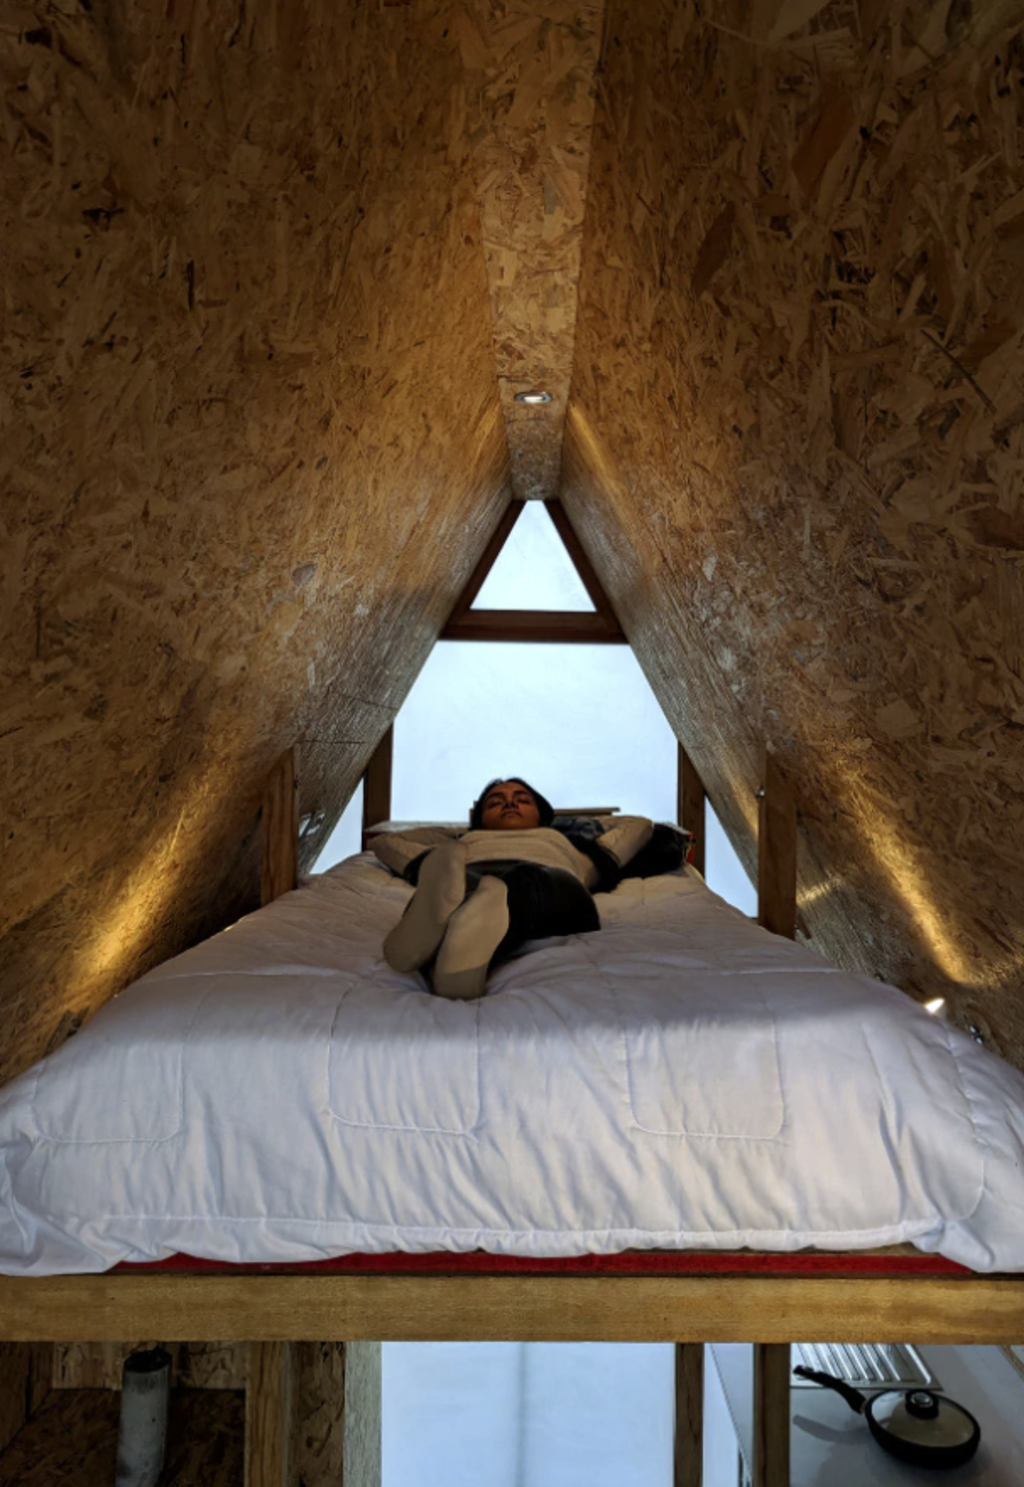 There may just be enough space for two. Photo: El Sindicato Arquitectura